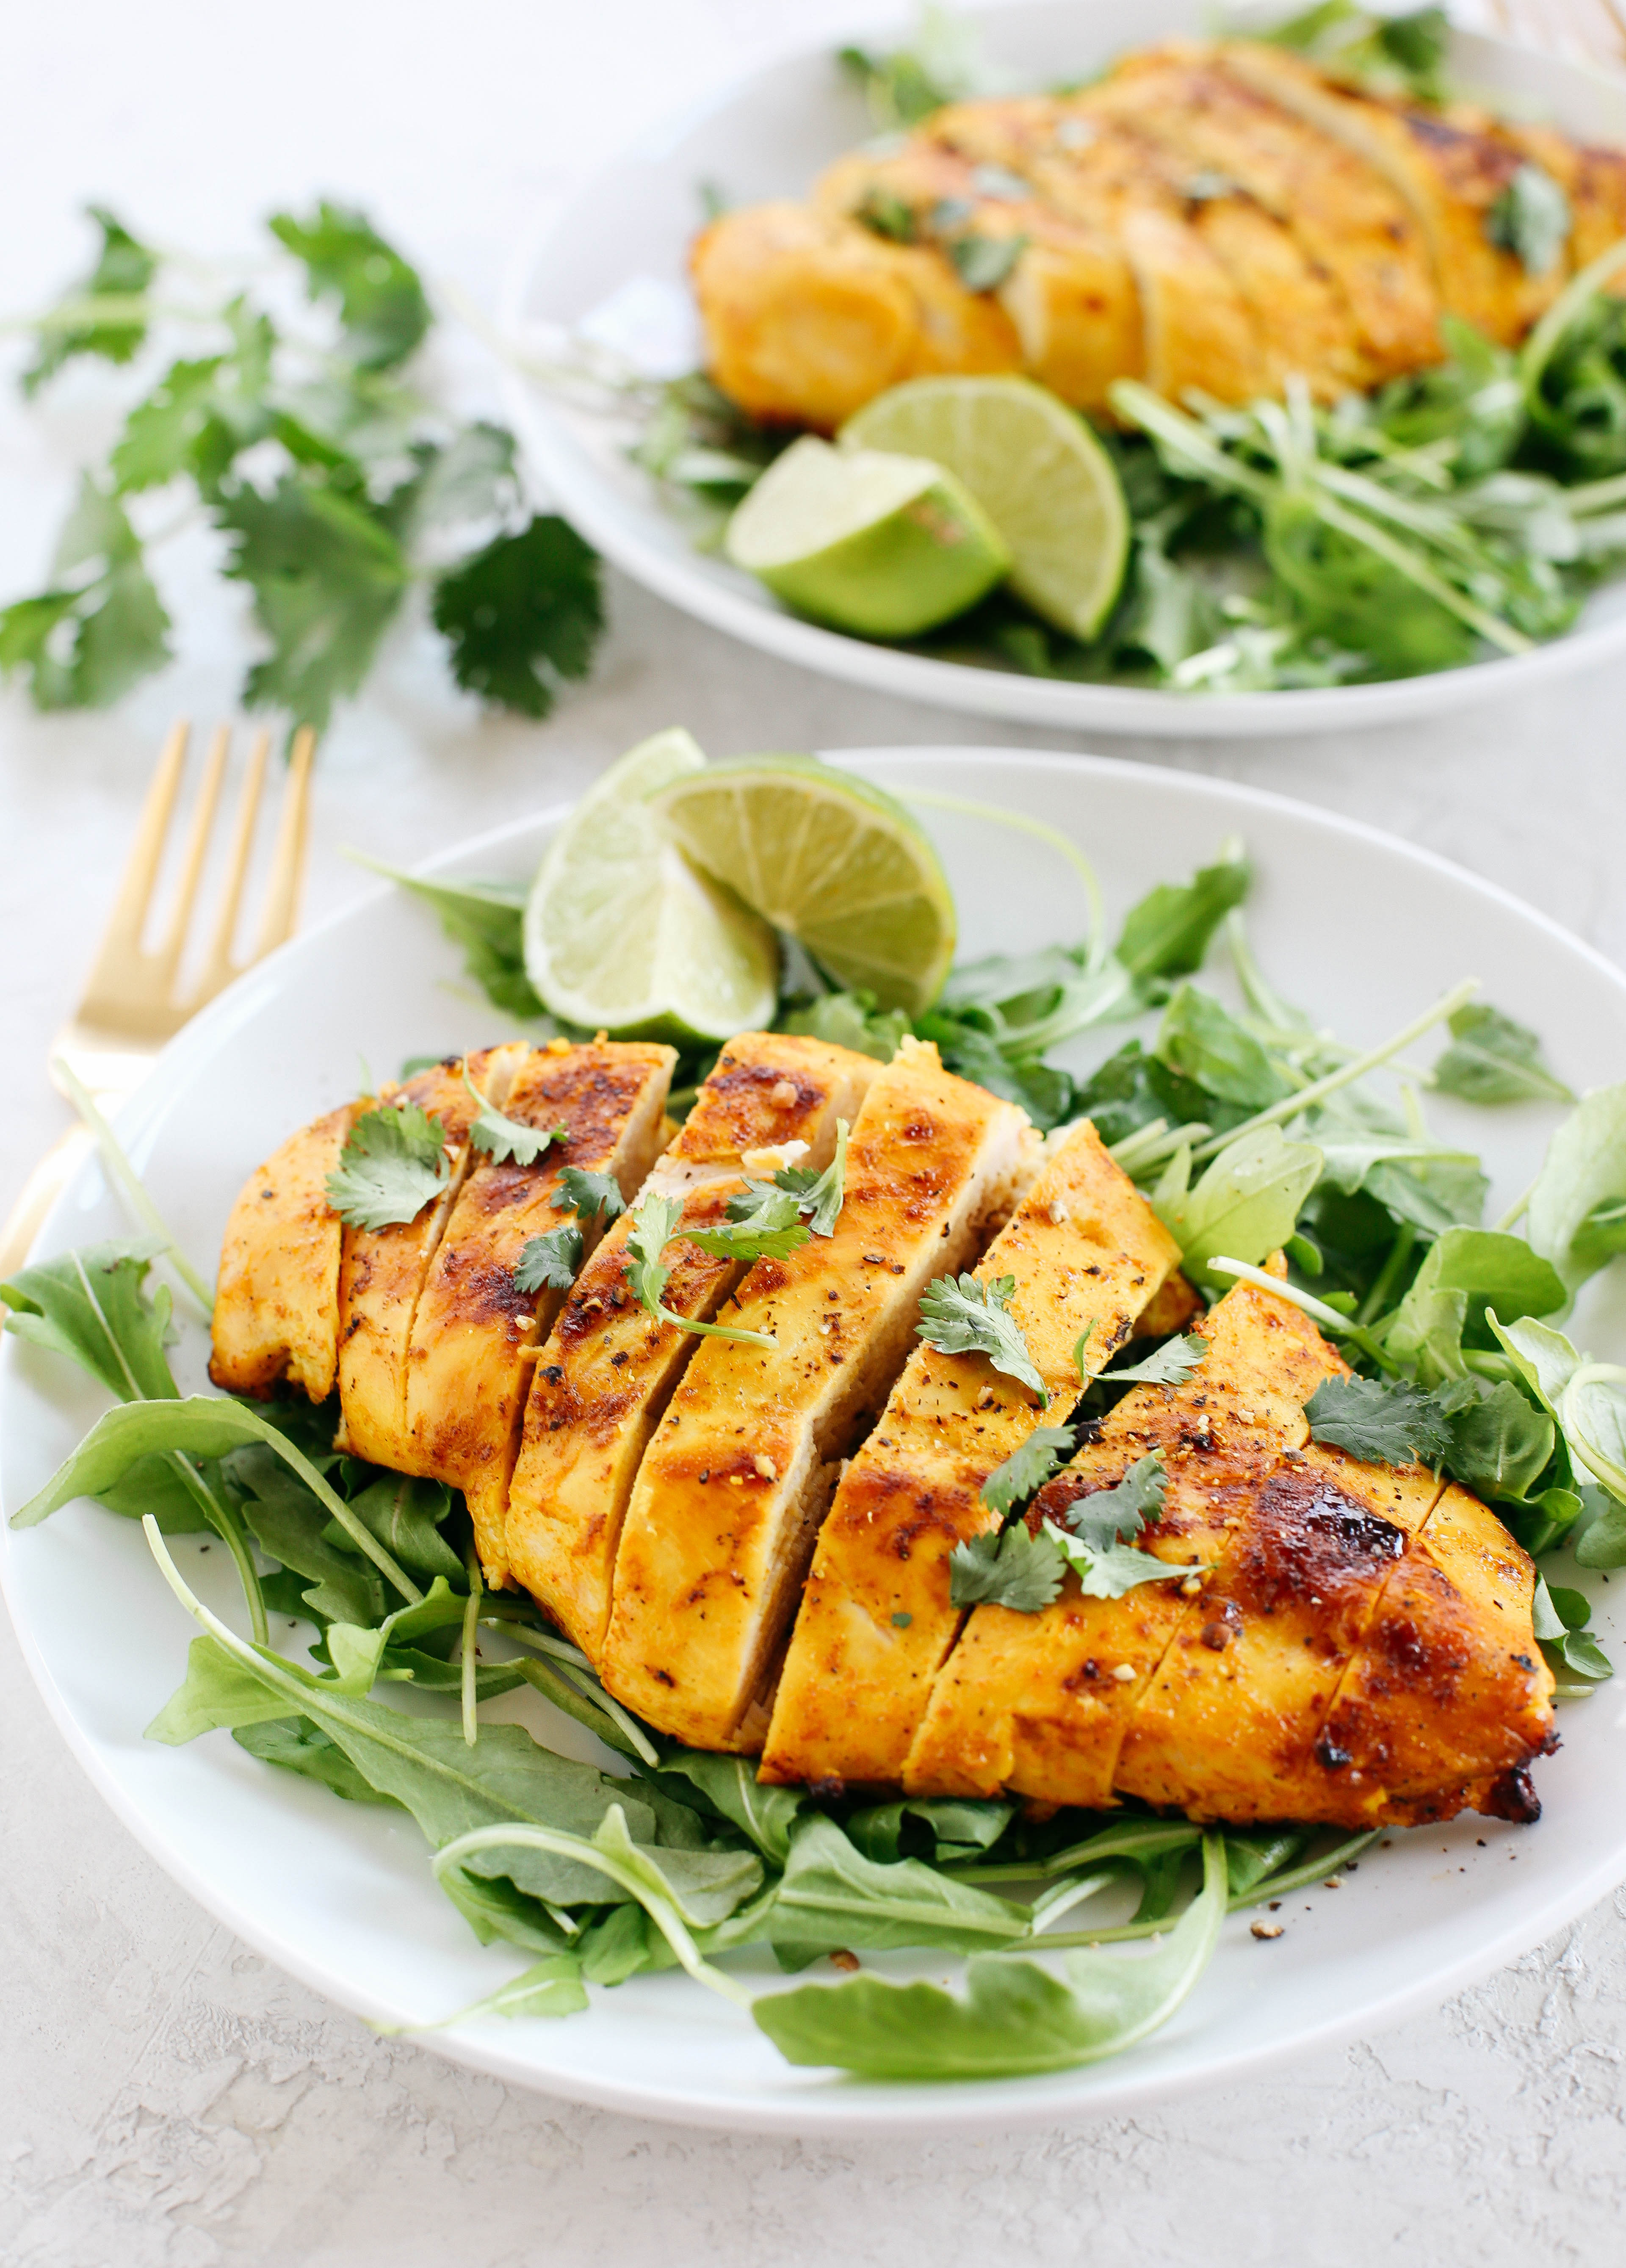 Marinated Turmeric Ginger Grilled Chicken (Whole 30, Paleo, Gluten Free, Dairy Free, Keto, Low Carb) #whole30 #keto #whole30approved